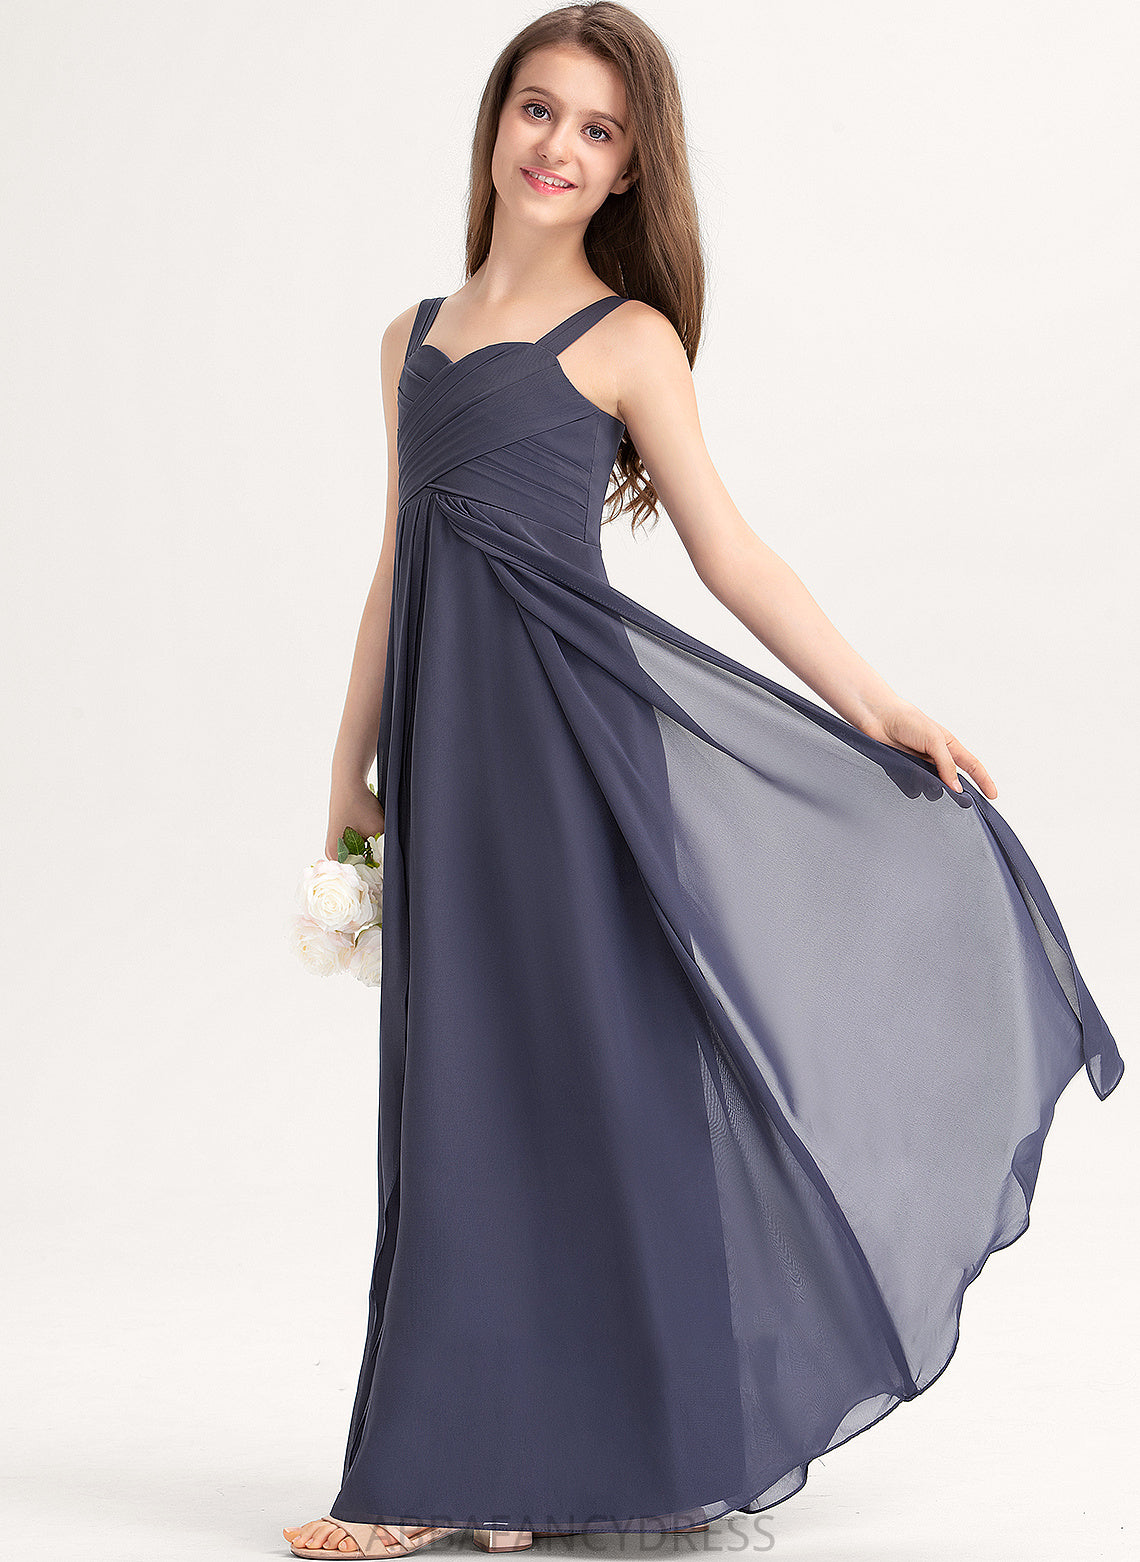 Ruffle Junior Bridesmaid Dresses A-Line Floor-Length Willow Sweetheart With Chiffon